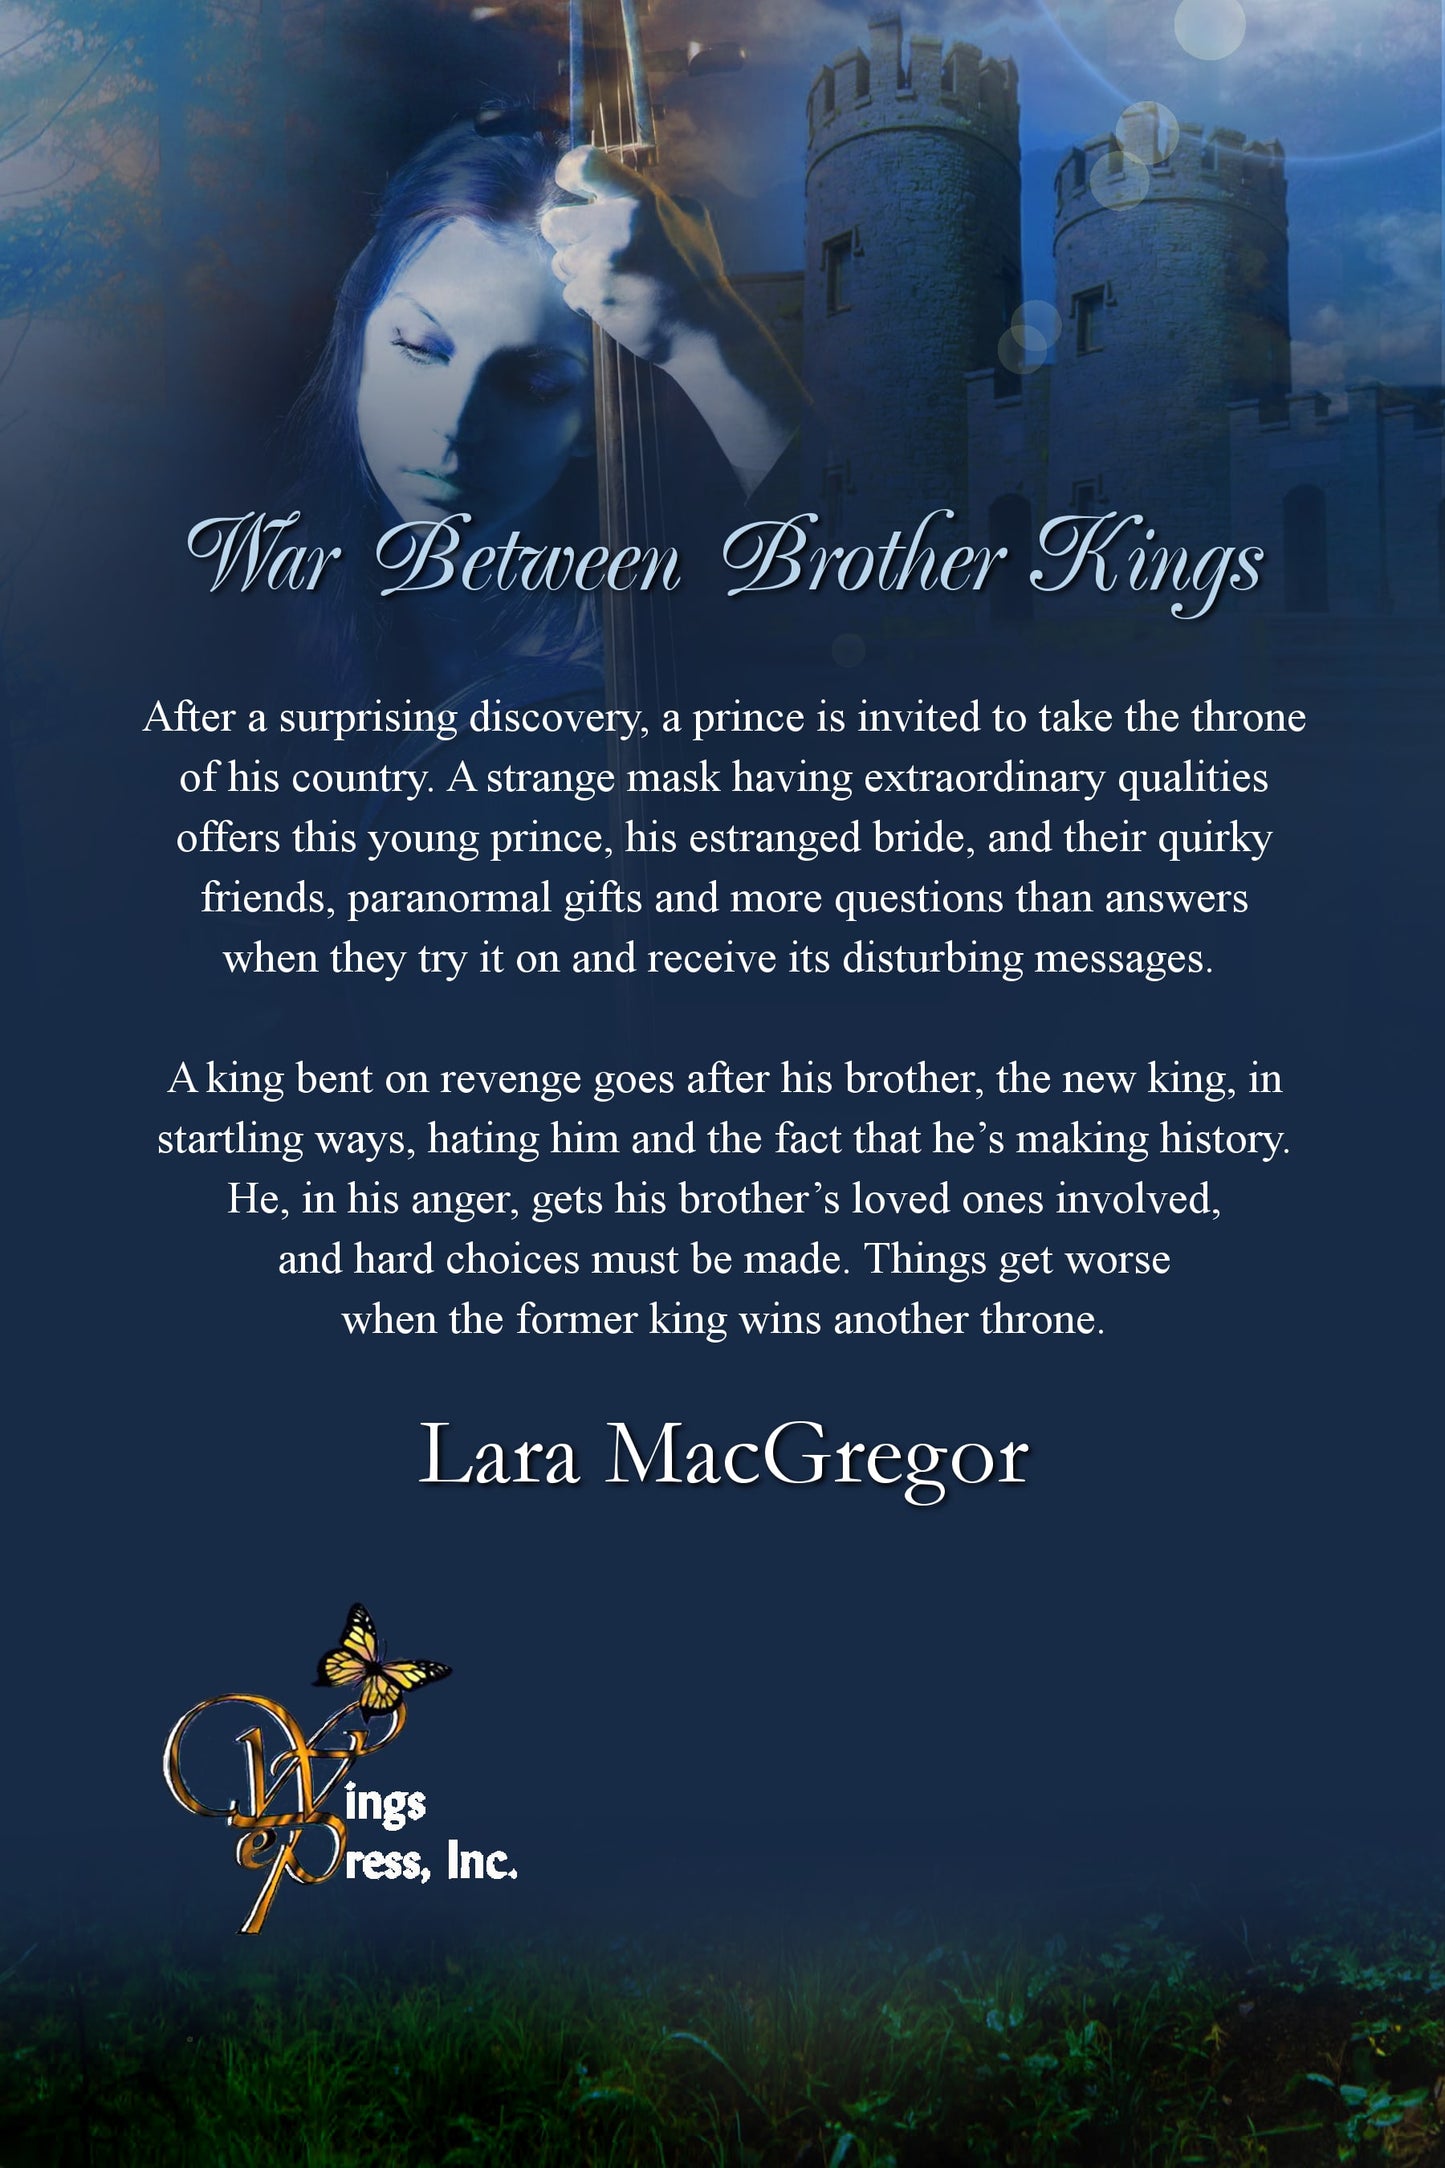 War Between Brother Kings (The Mask of Truth Book 2)